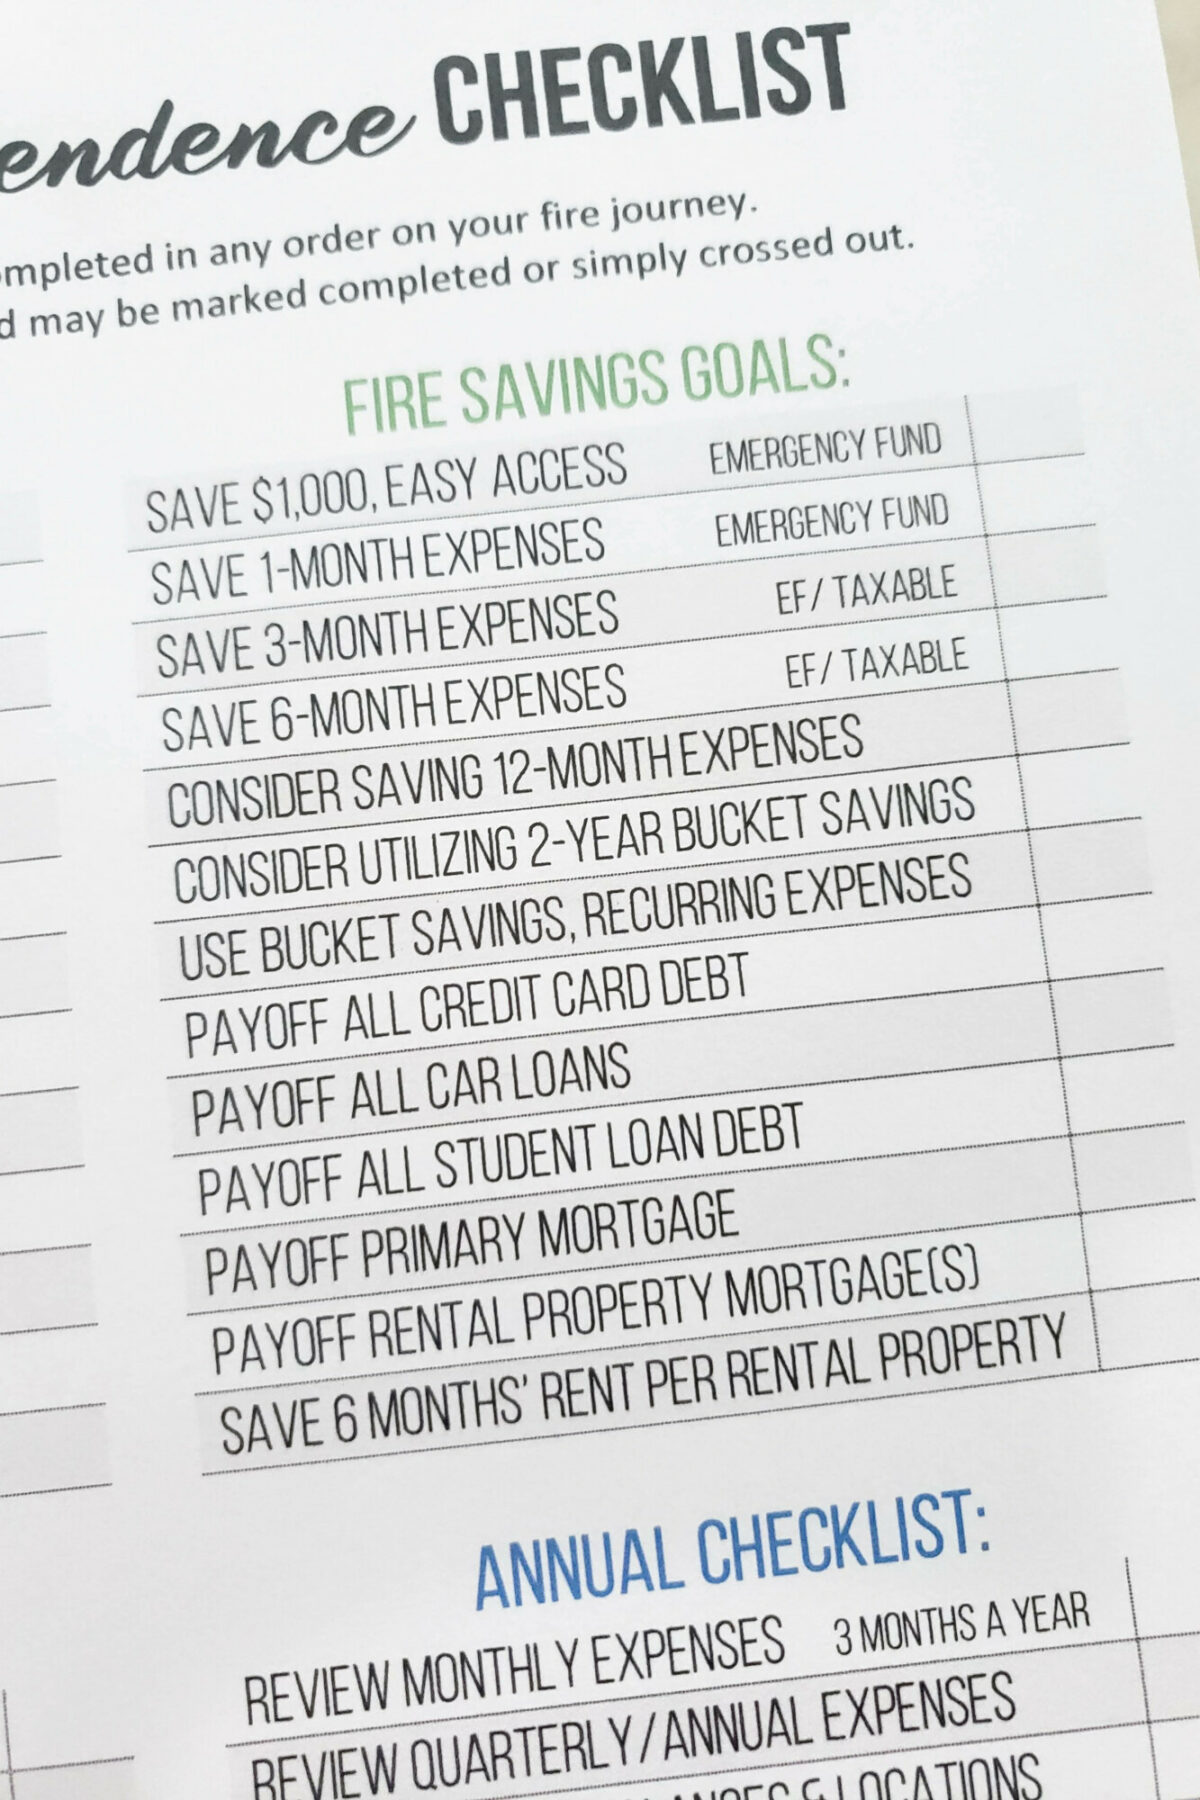 Financial Independence Checklist  - Printable F.I.R.E. goals and milestones - Working towards easy saving goals in your FI journey